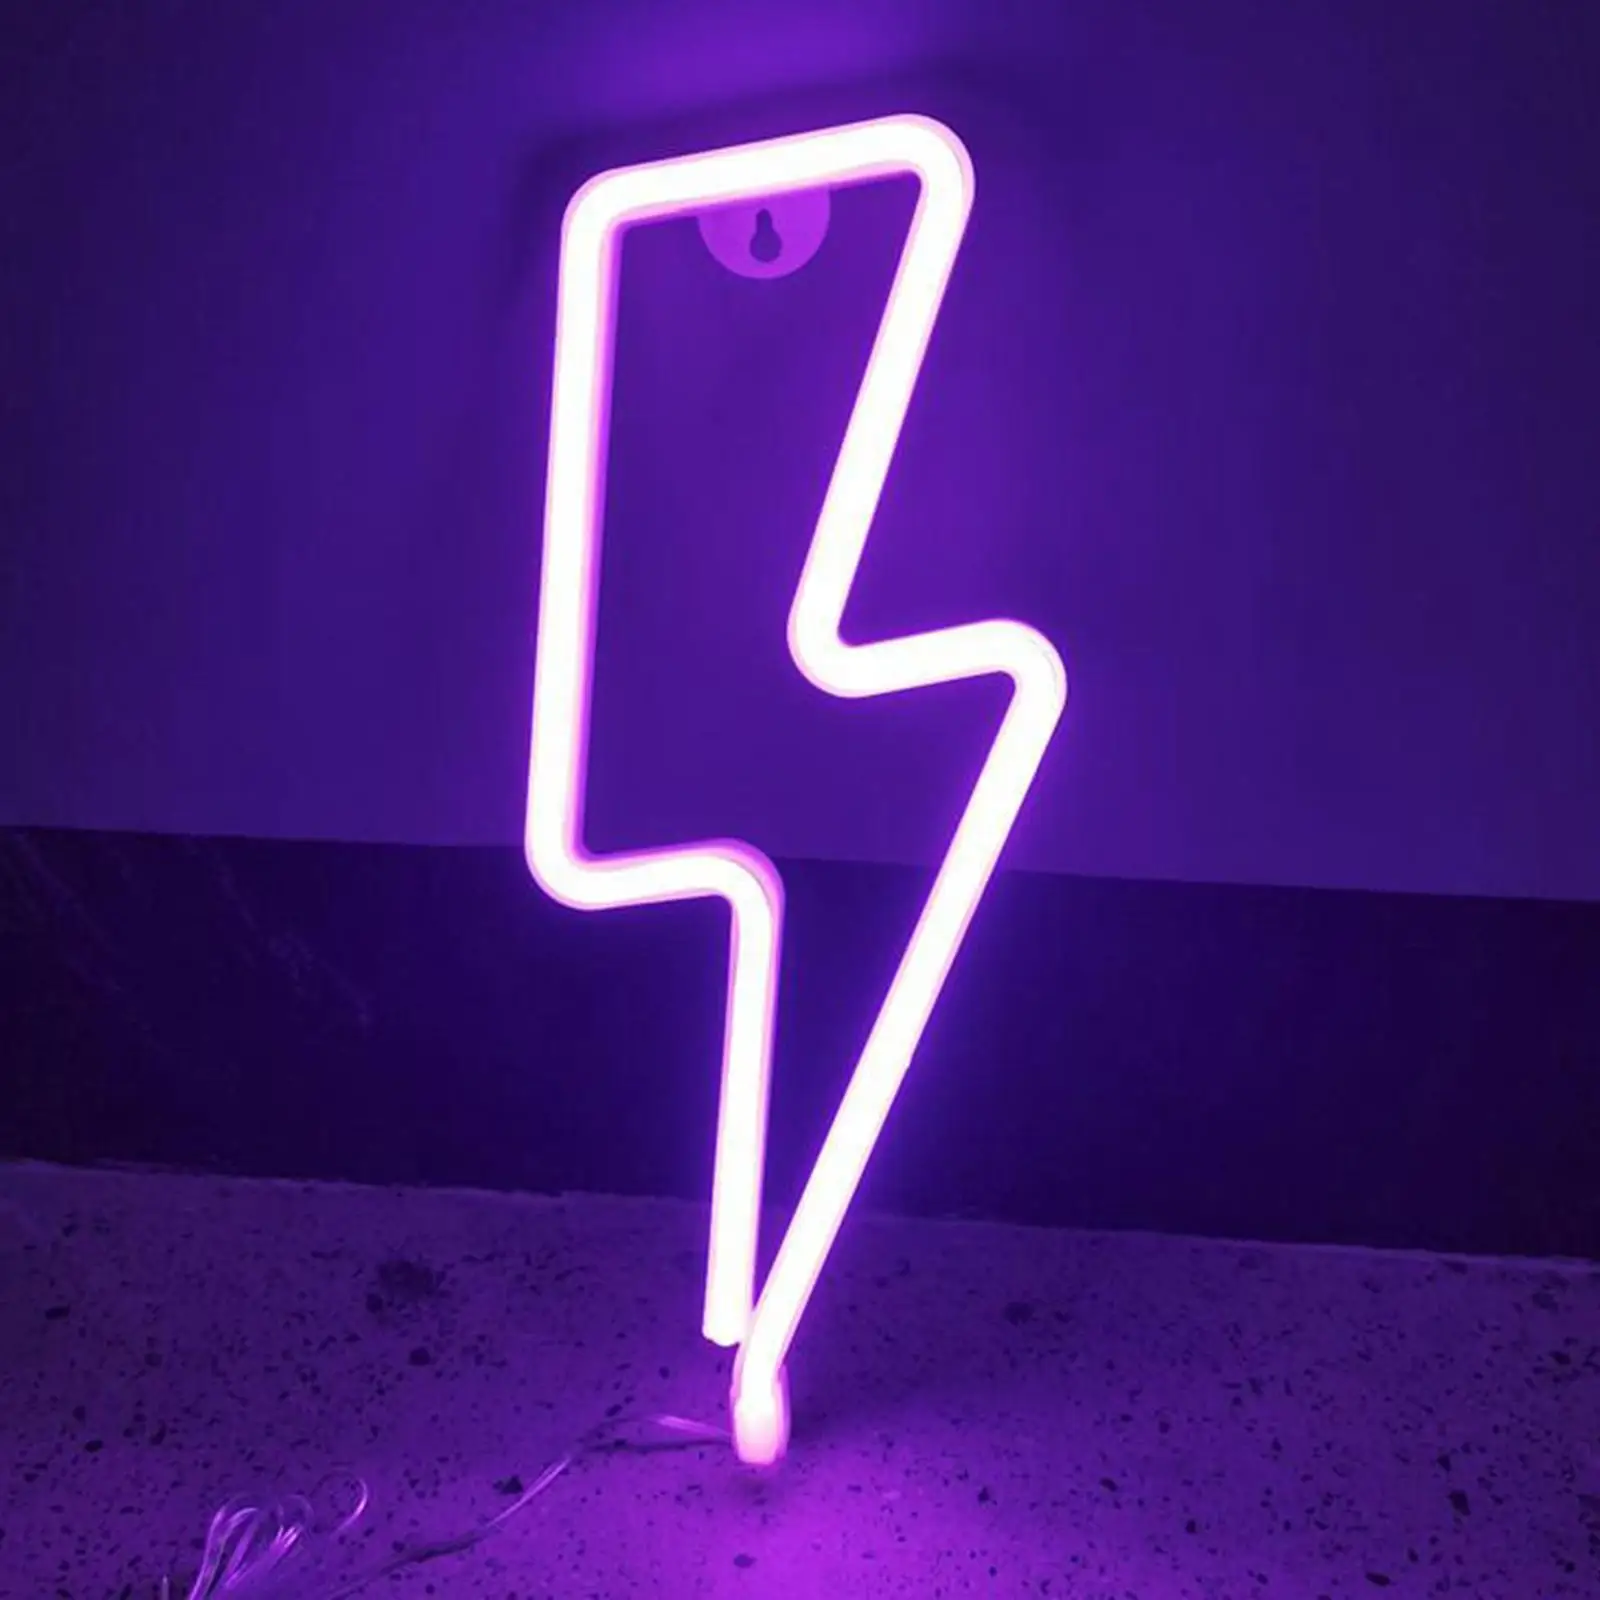 LED Home Neon Sign   Shaped Wall Neon Light USB Decorative Night Light Wall Decor for Kids Baby Room Wedding Party